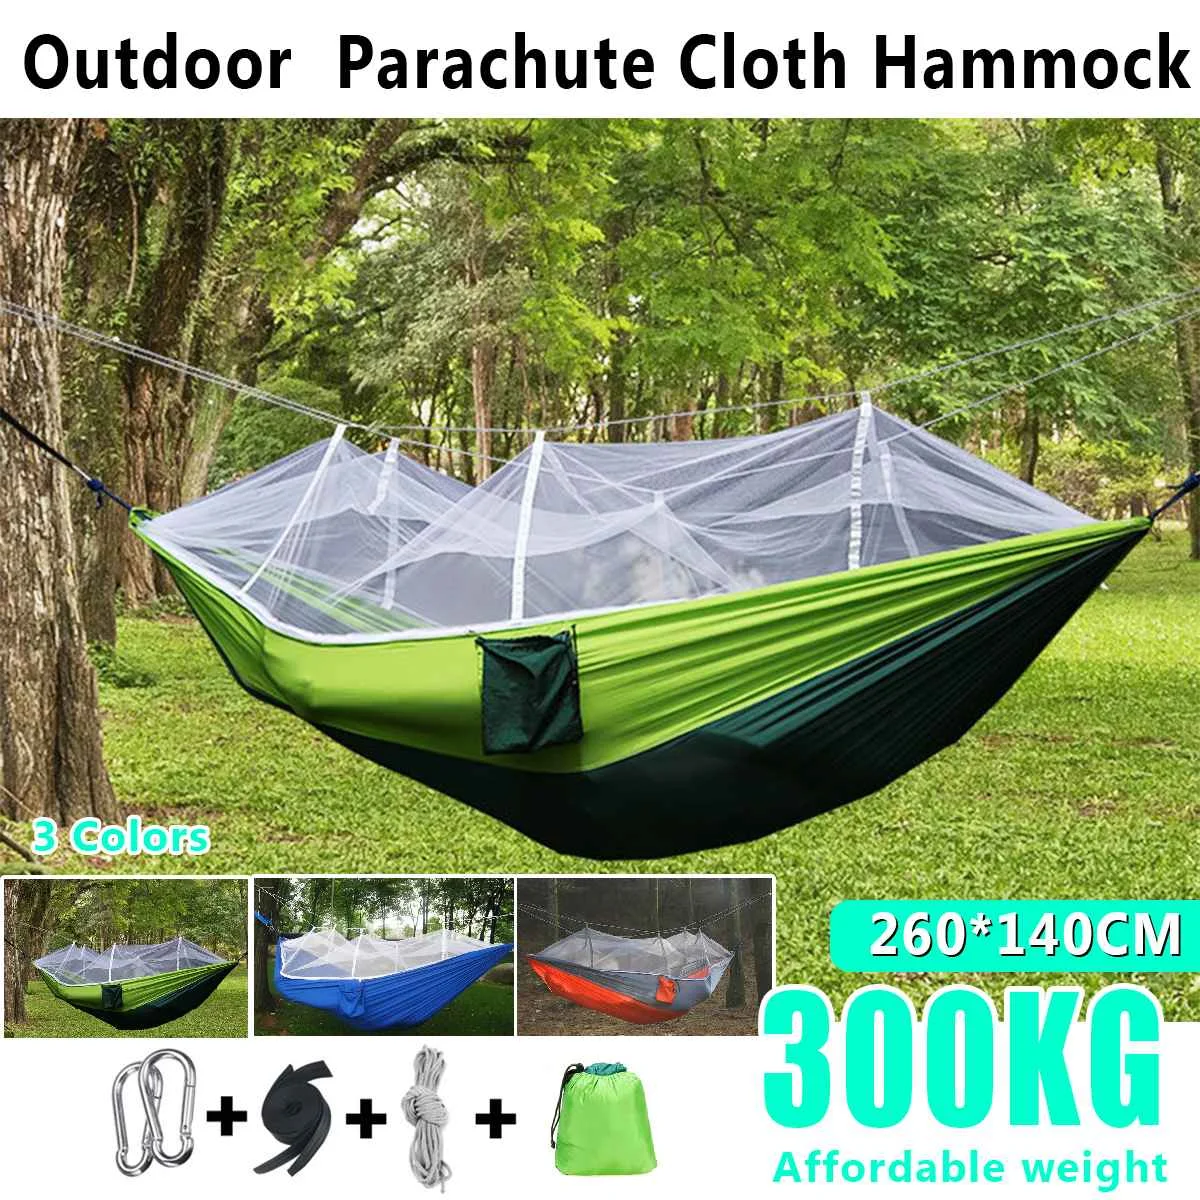 Portable Tent Camping Hammock Mosquito Net Cover Yard,Swing Bed Garden Outdoor 